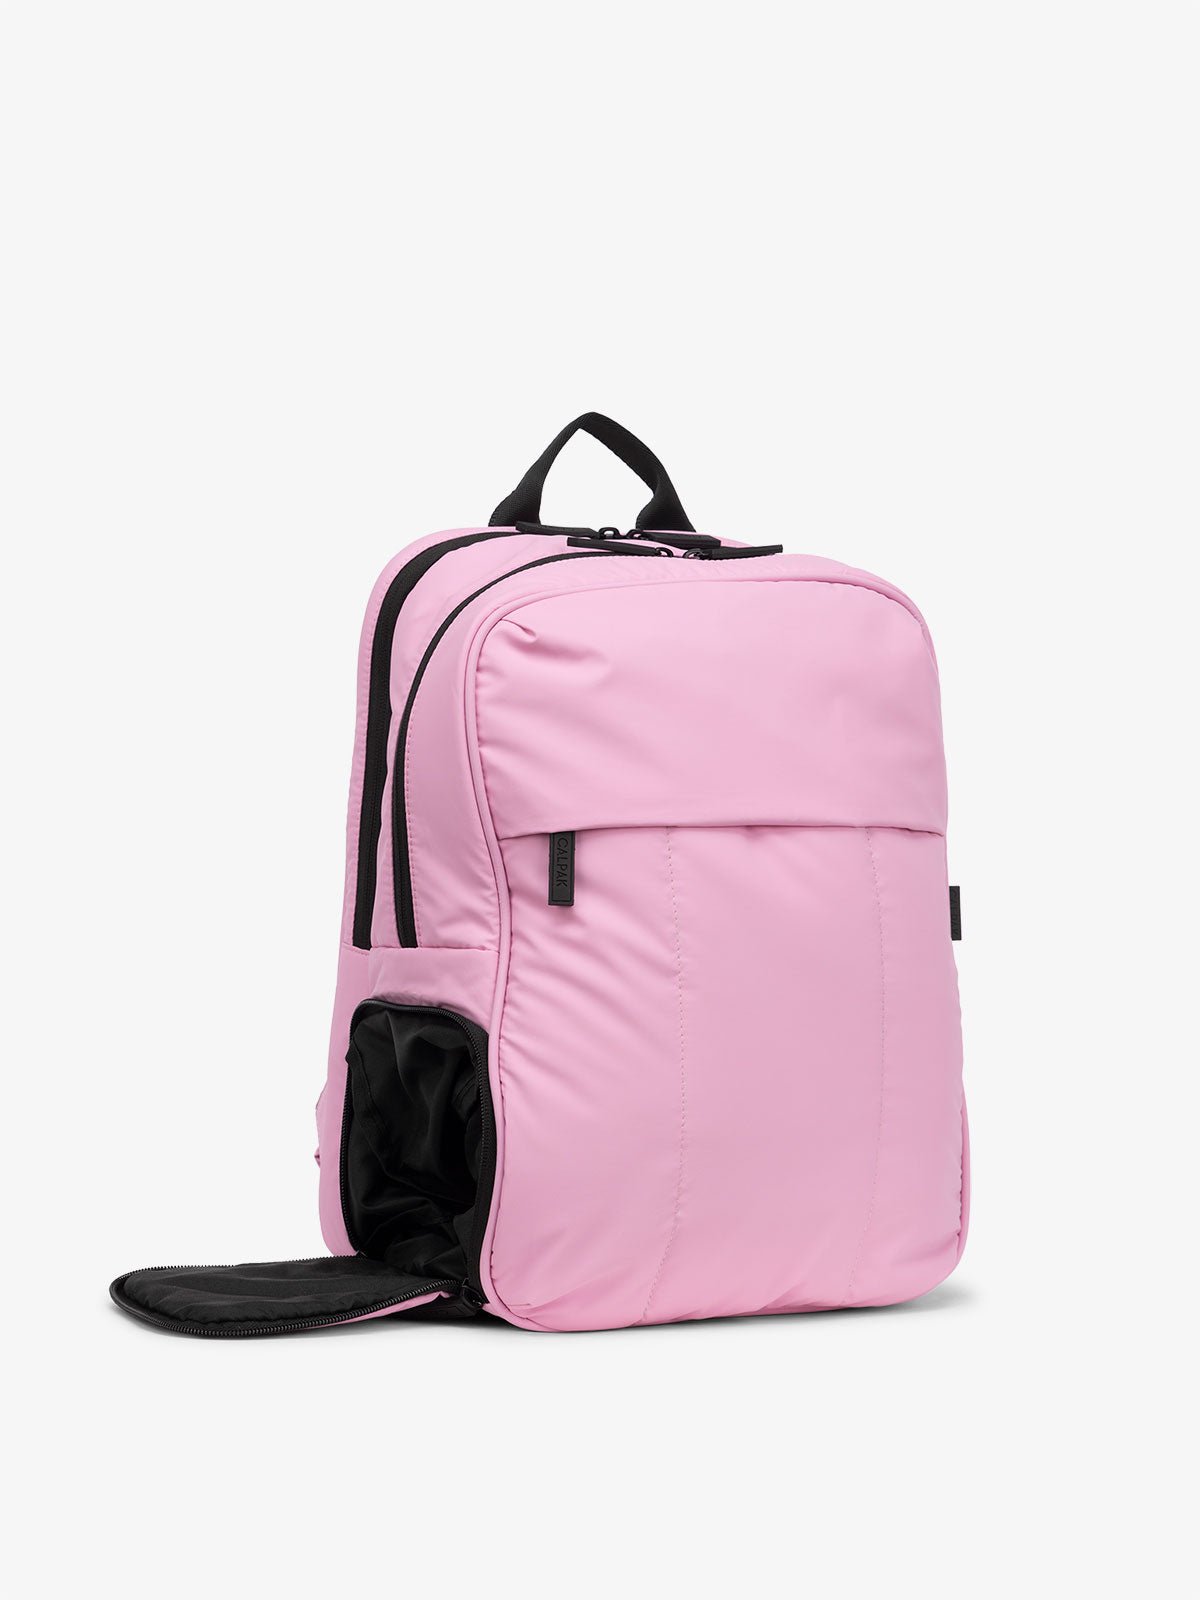 CALPAK Luka 15 Inch Laptop Backpack with shoe compartment in pink